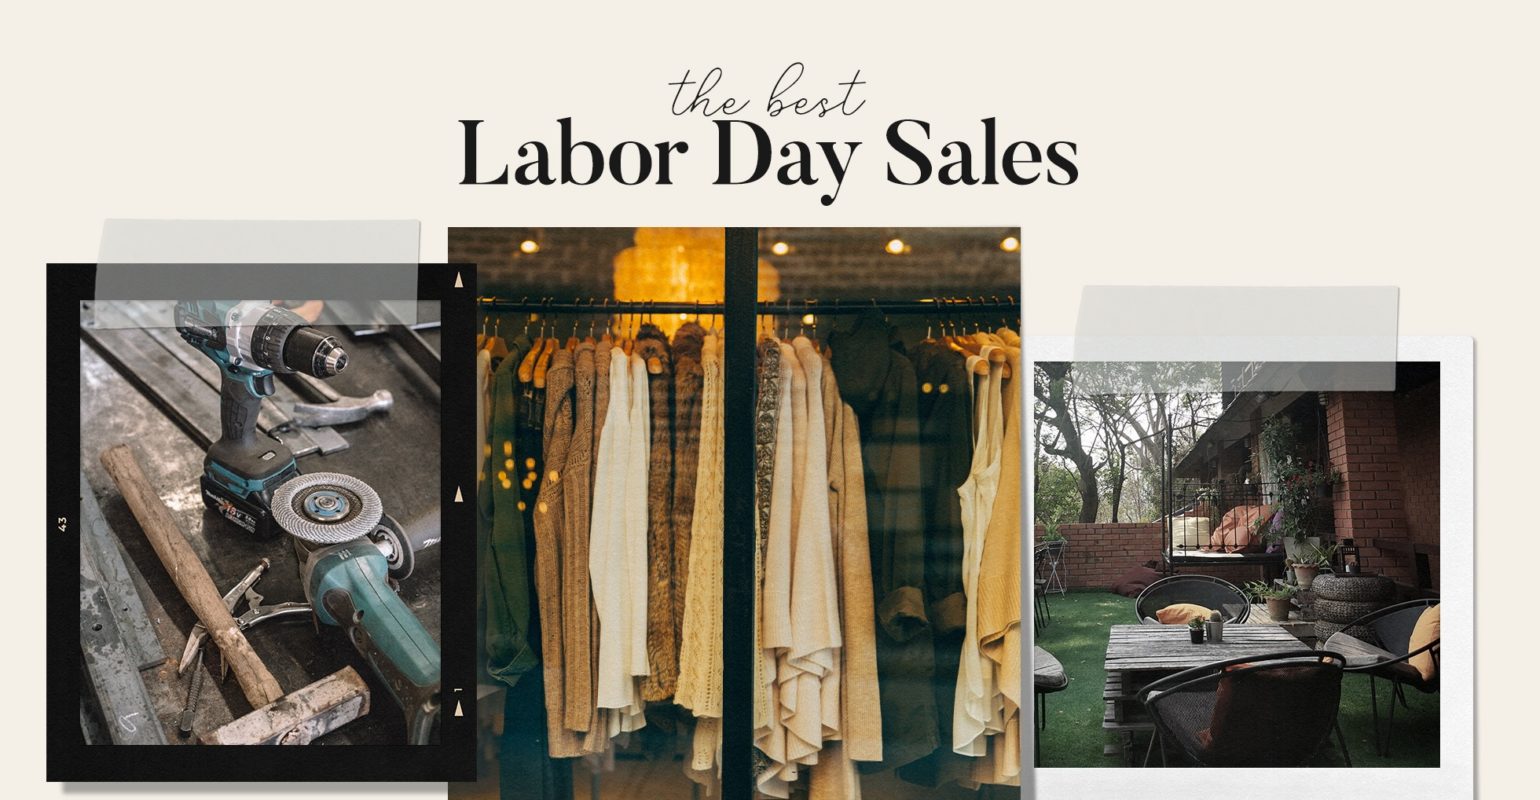 The Best Labor Day Sales